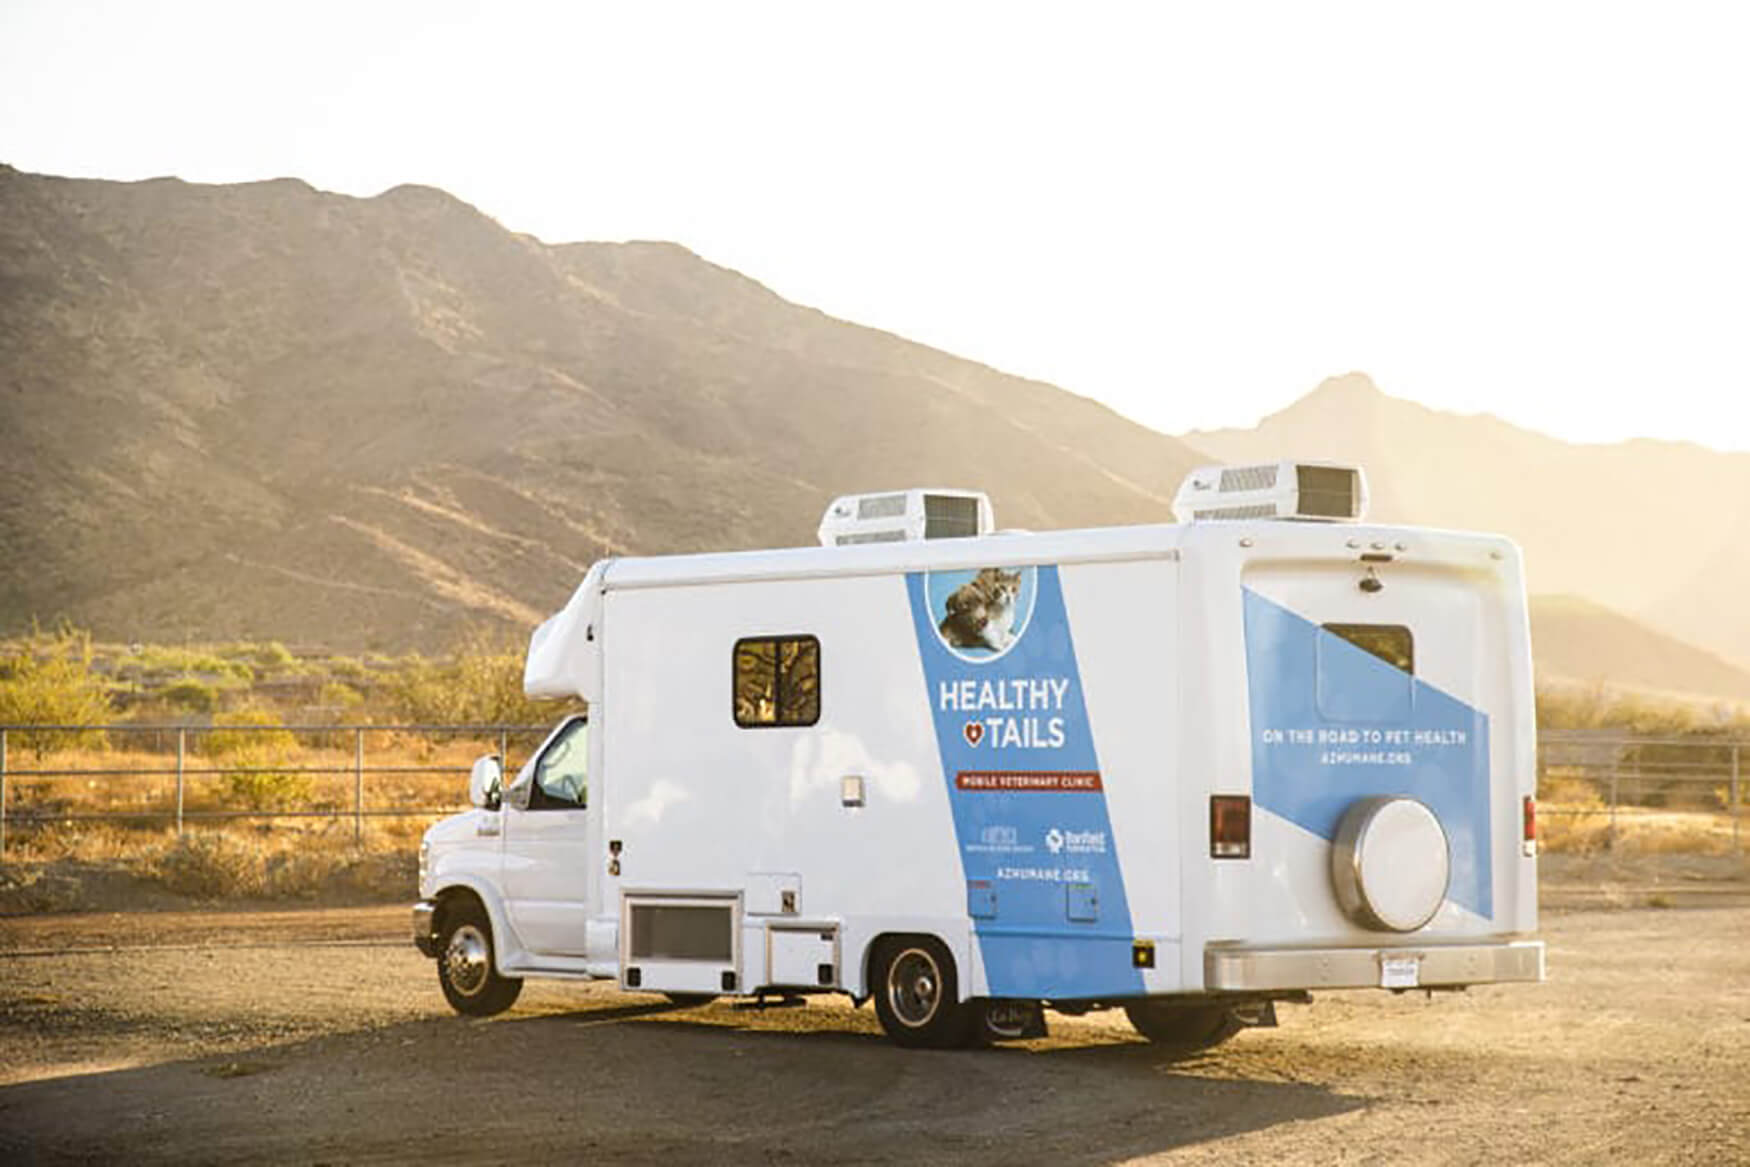 The Healthy Tails Mobile Unit parked in front of hills